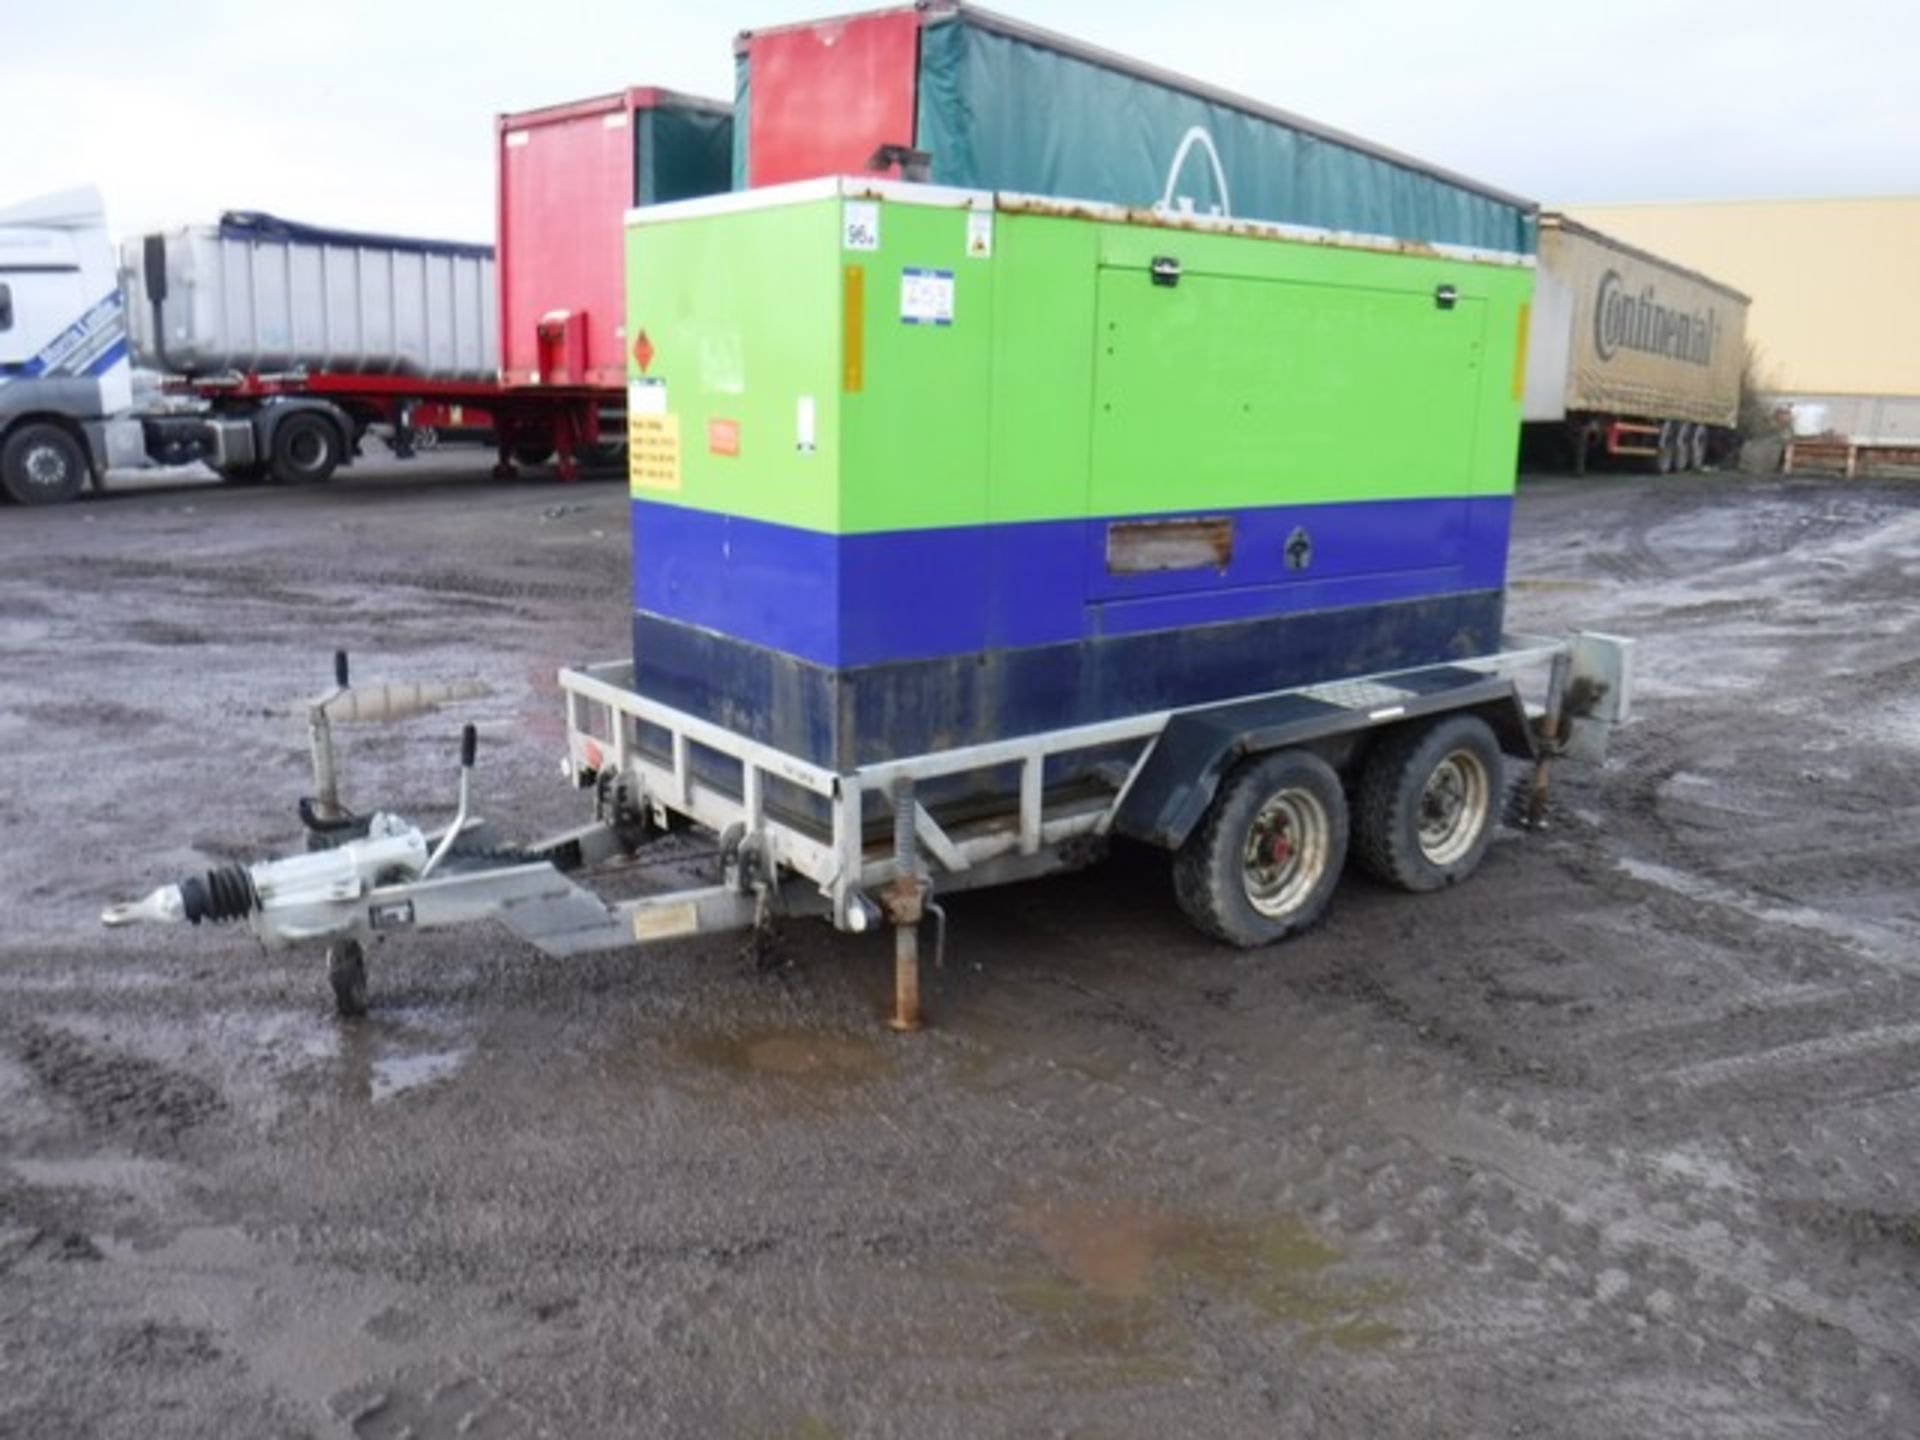 F.G.Wilson LCH 100KVA diesel generator on twin axle trailer 17977 hrs (not verified)ID no. 60-26 S/N